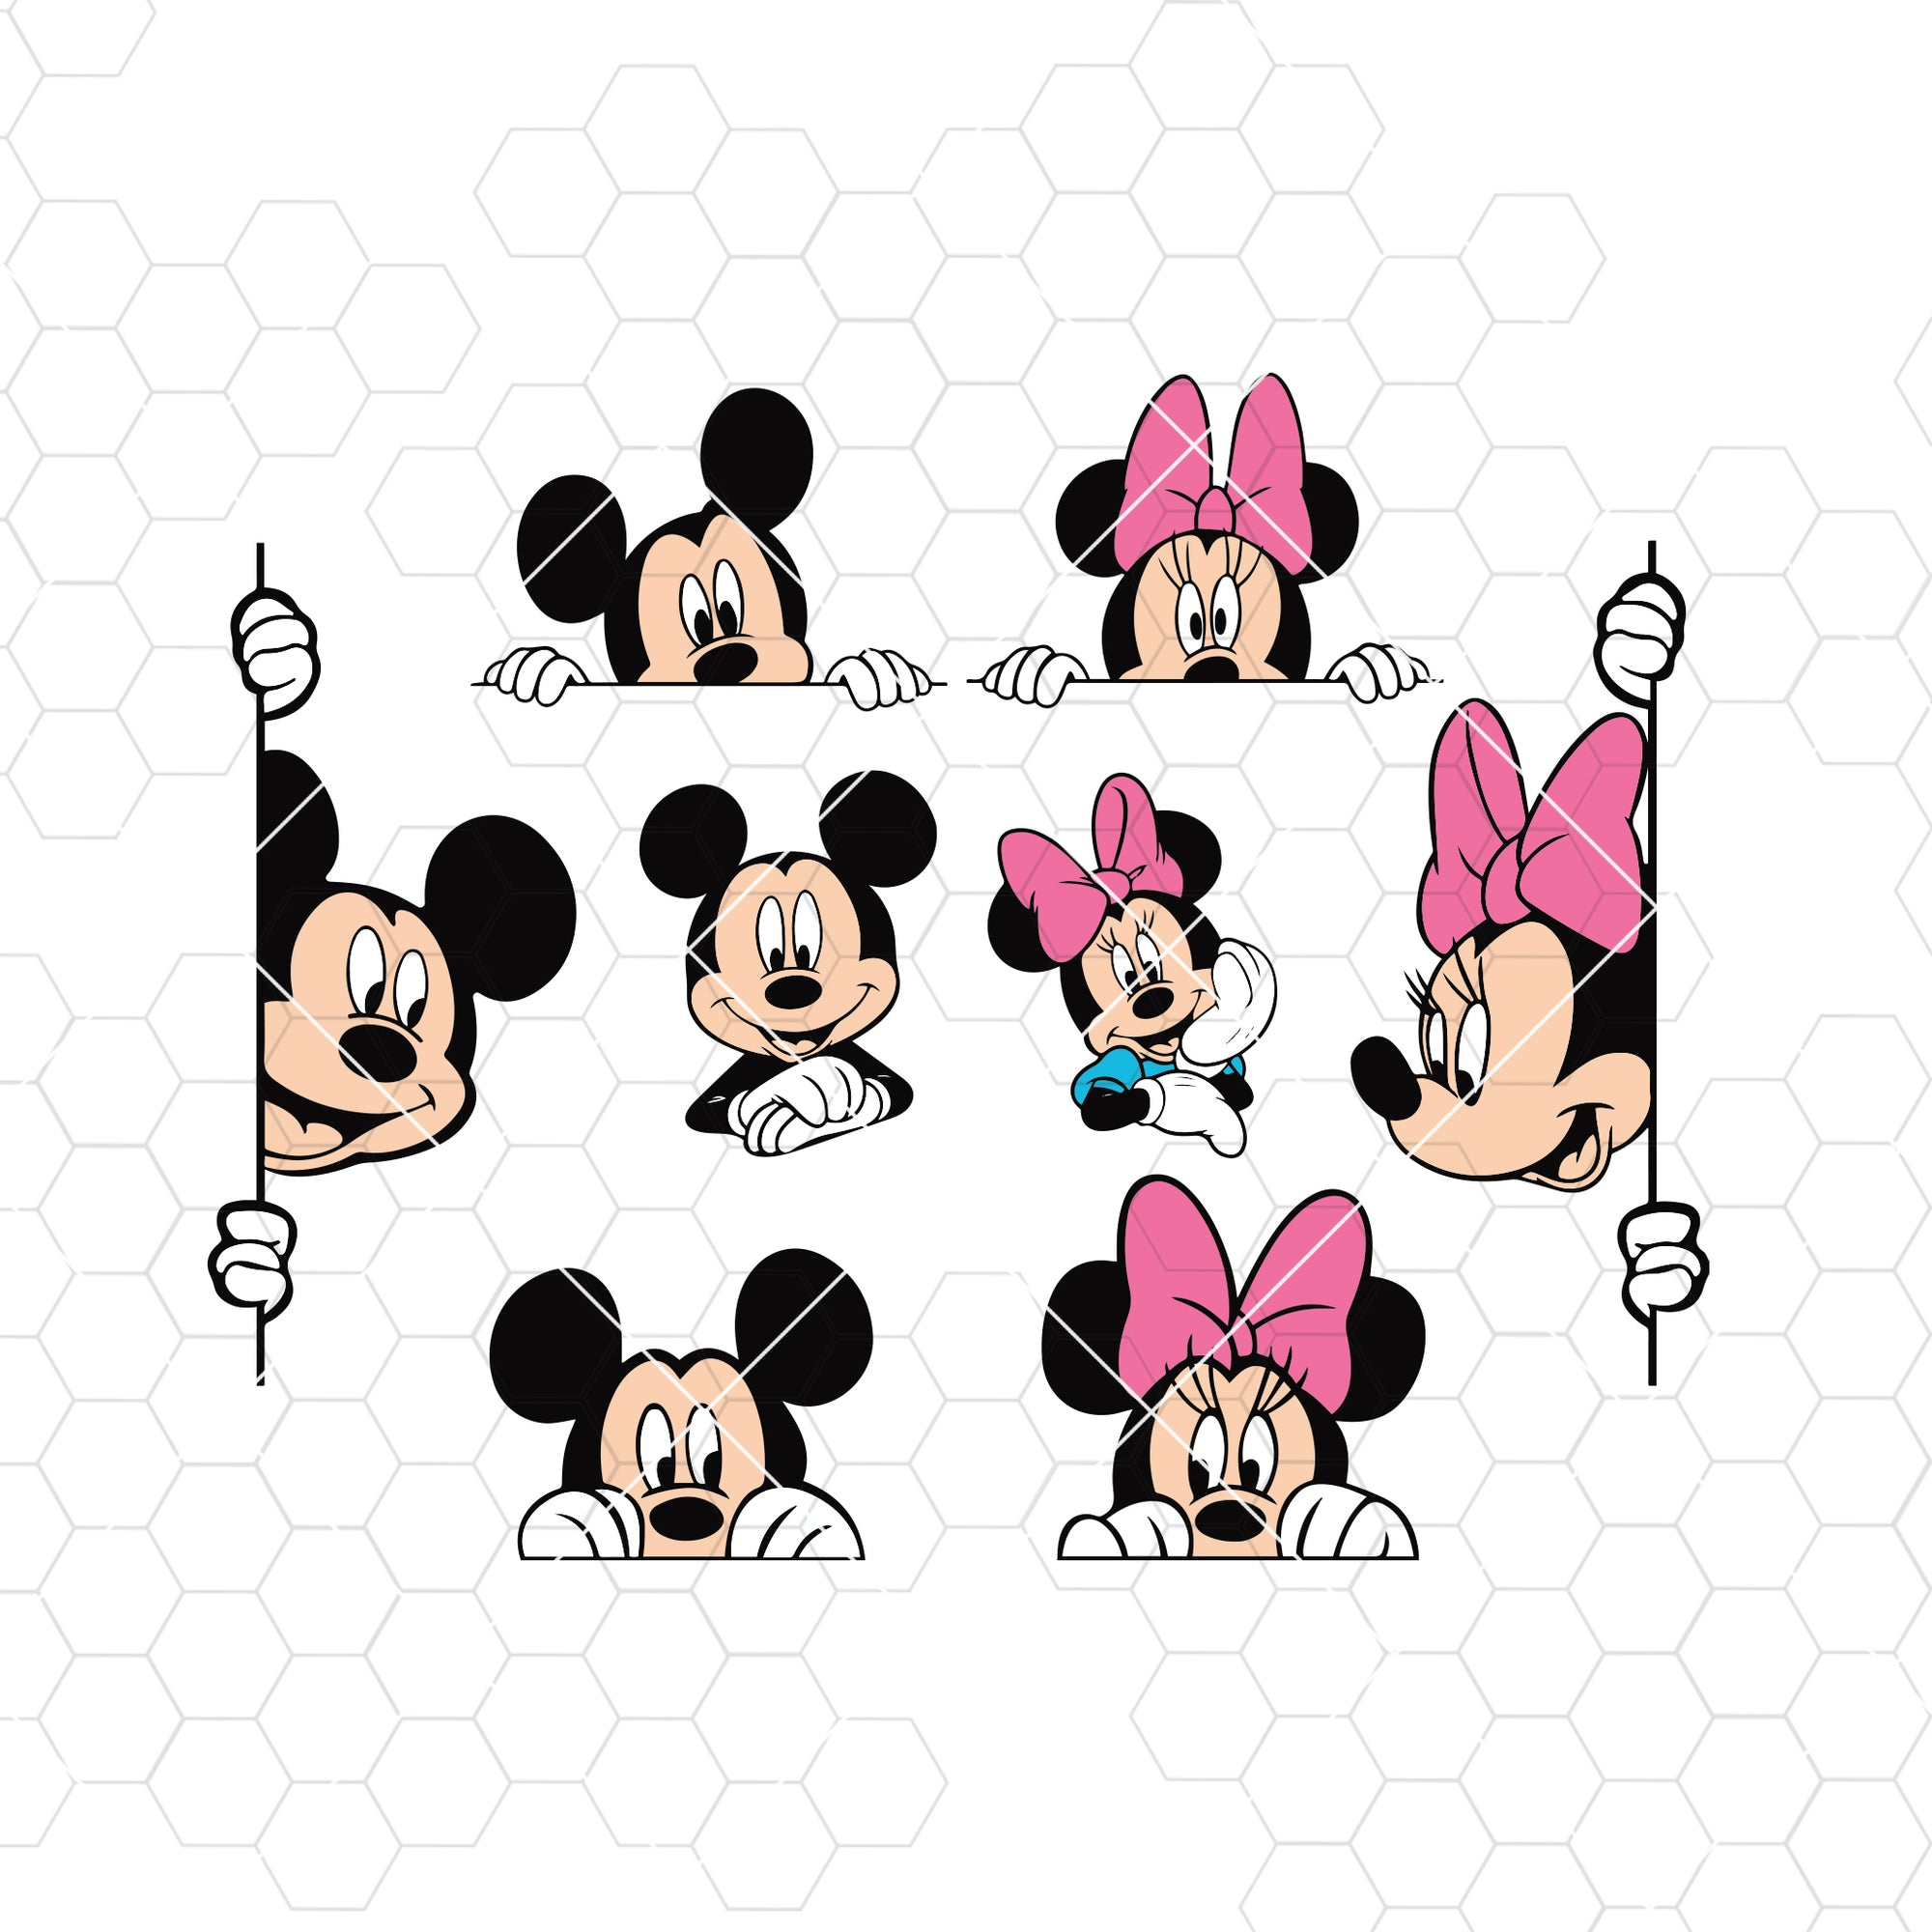 Mickey Mouse Coffee - SVG Cut File